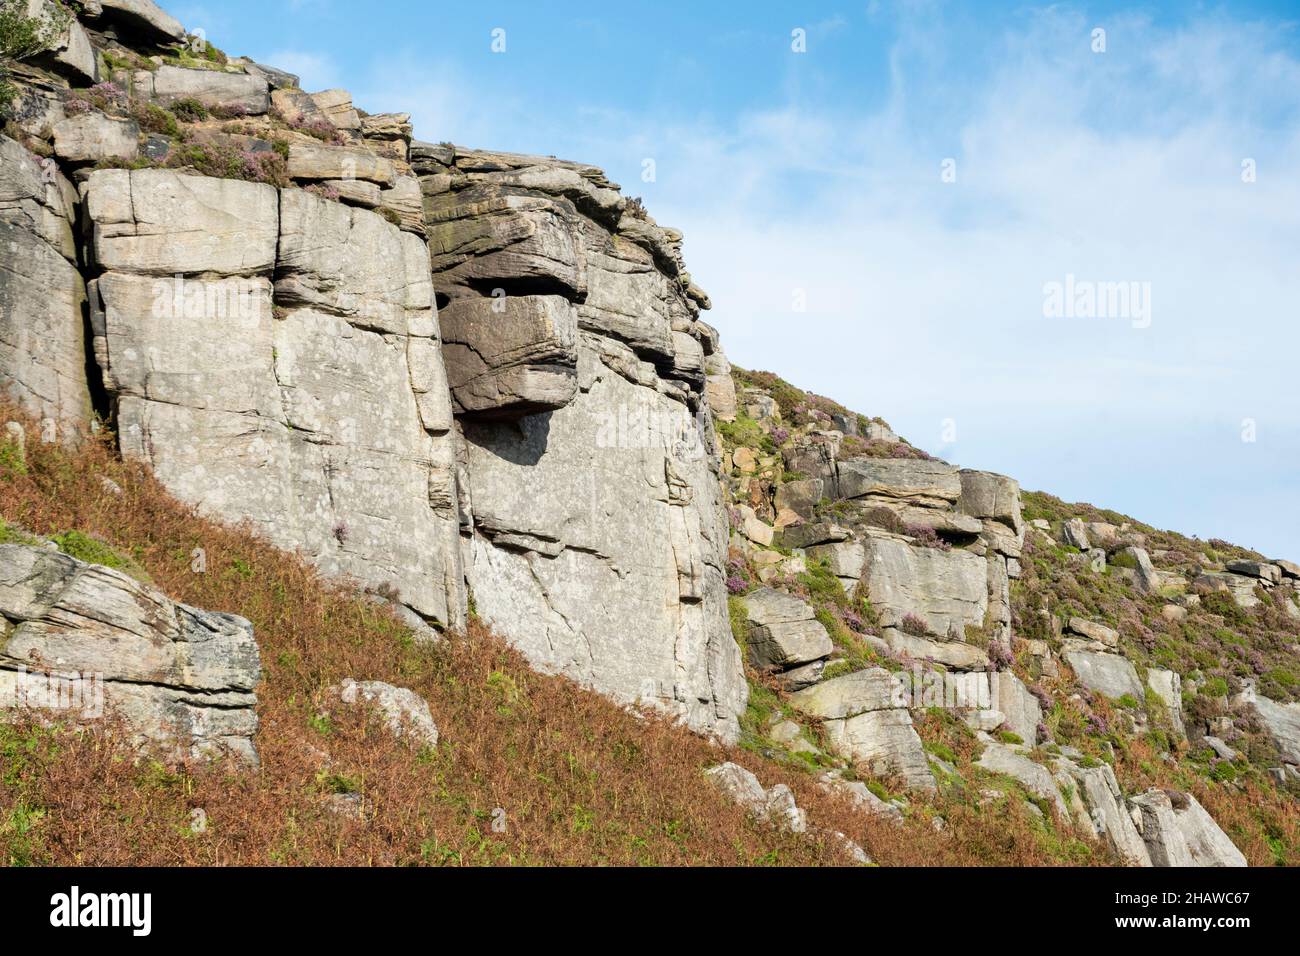 A stern face looks down from the cliff face of Stanage Edge, a 4 mile long gritstone escarpment in the Peak District, Derbyshire, UK Stock Photo